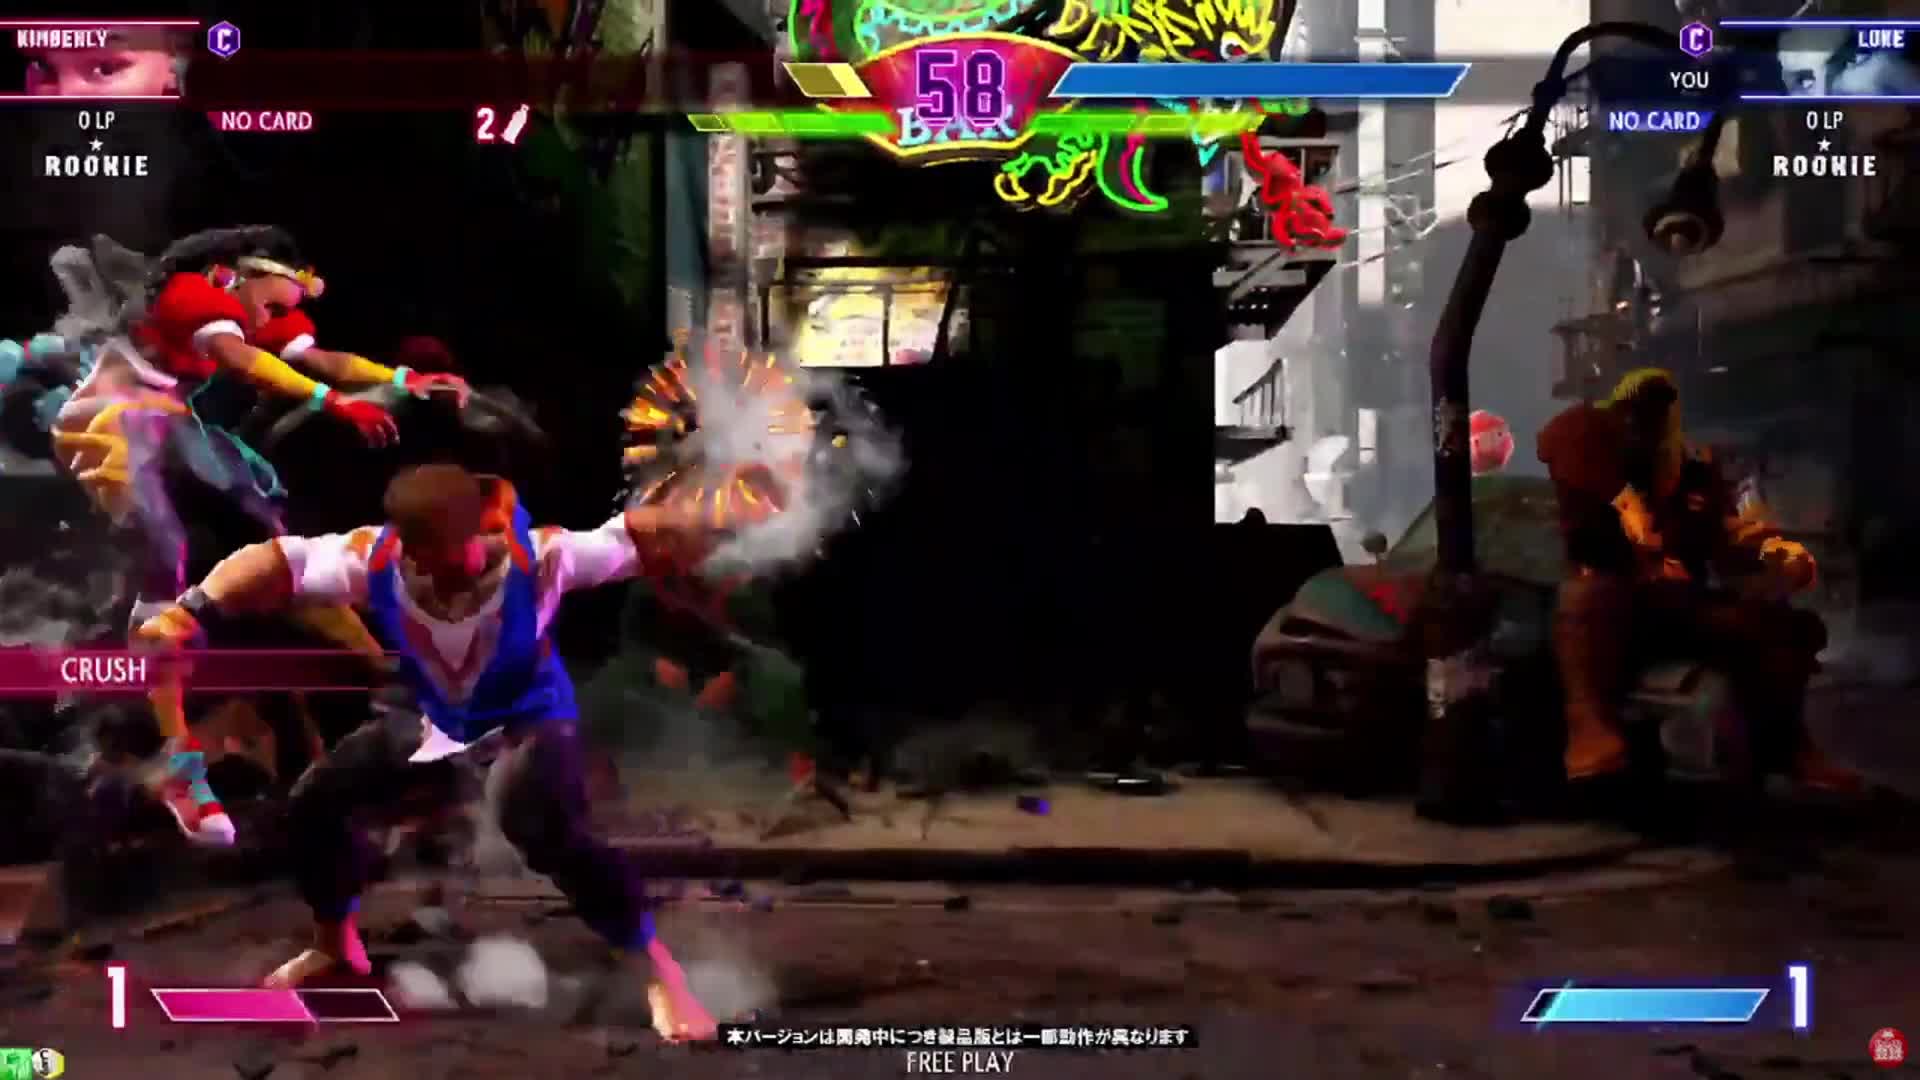 Arcade Version of SFV: Arcade Edition Will Be Called Street Fighter V:  Type Arcade